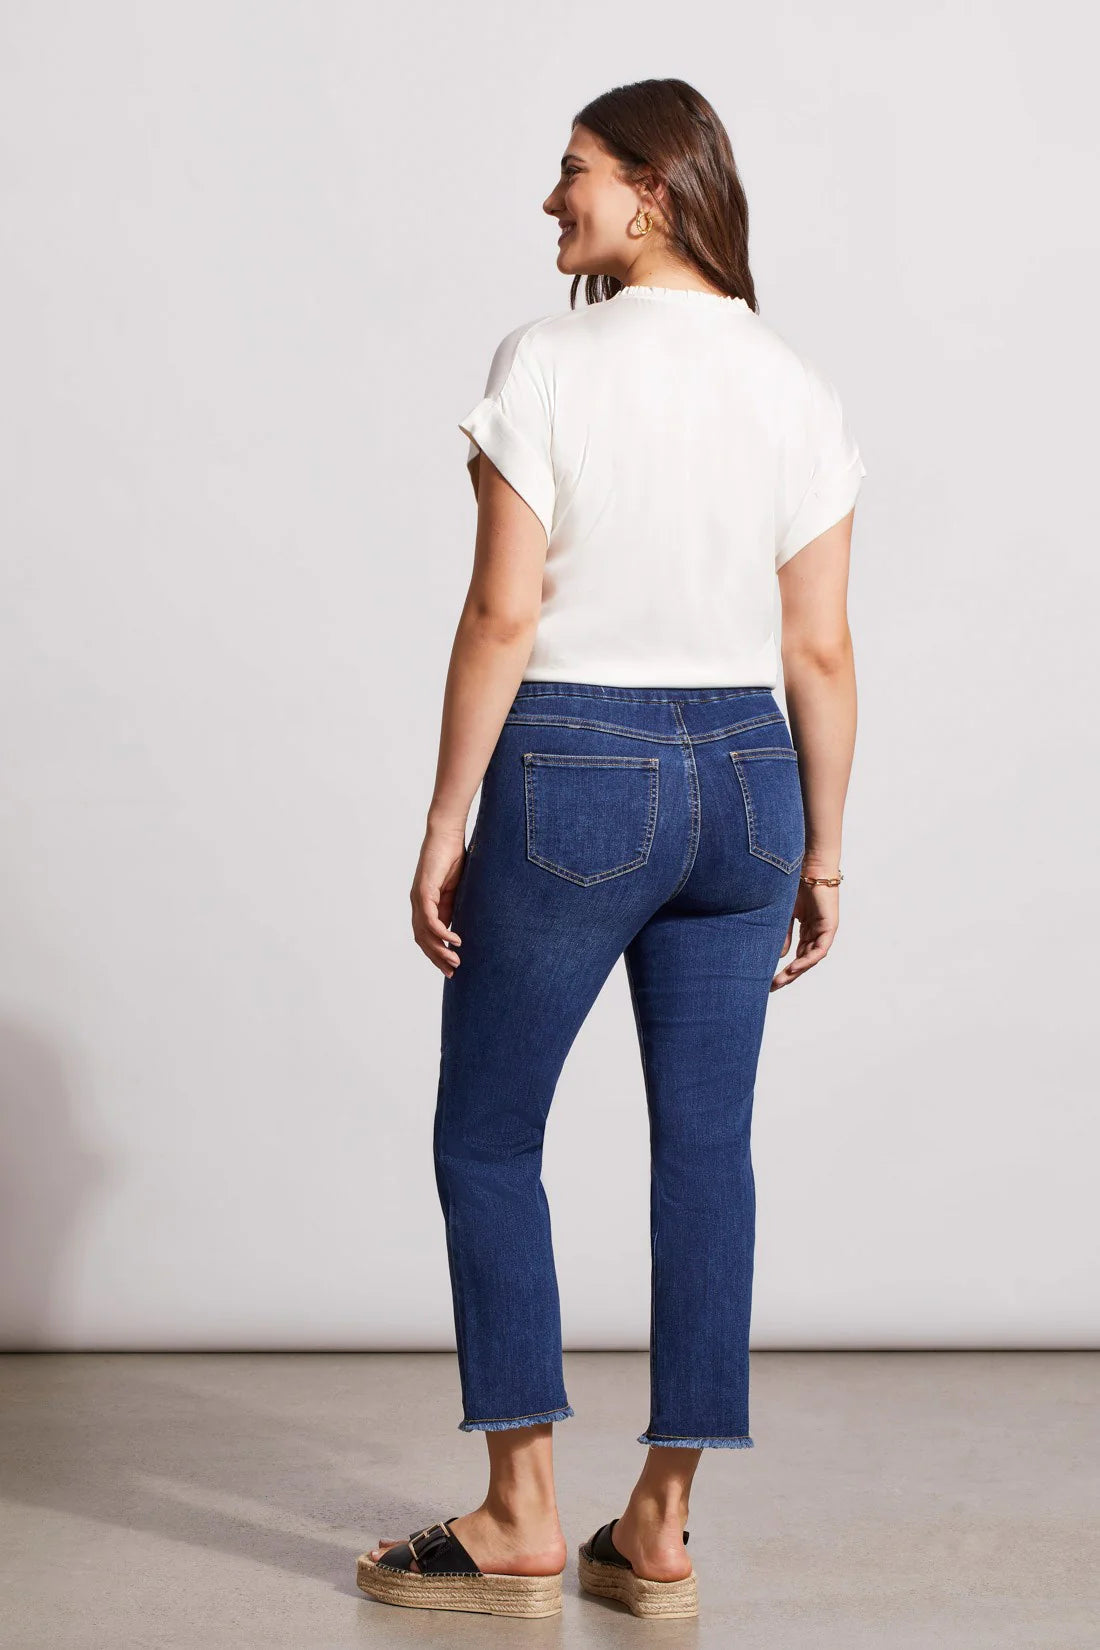 The thoughtfully designed jean is slim-fitting through the hip, butt and thigh with a straight leg.